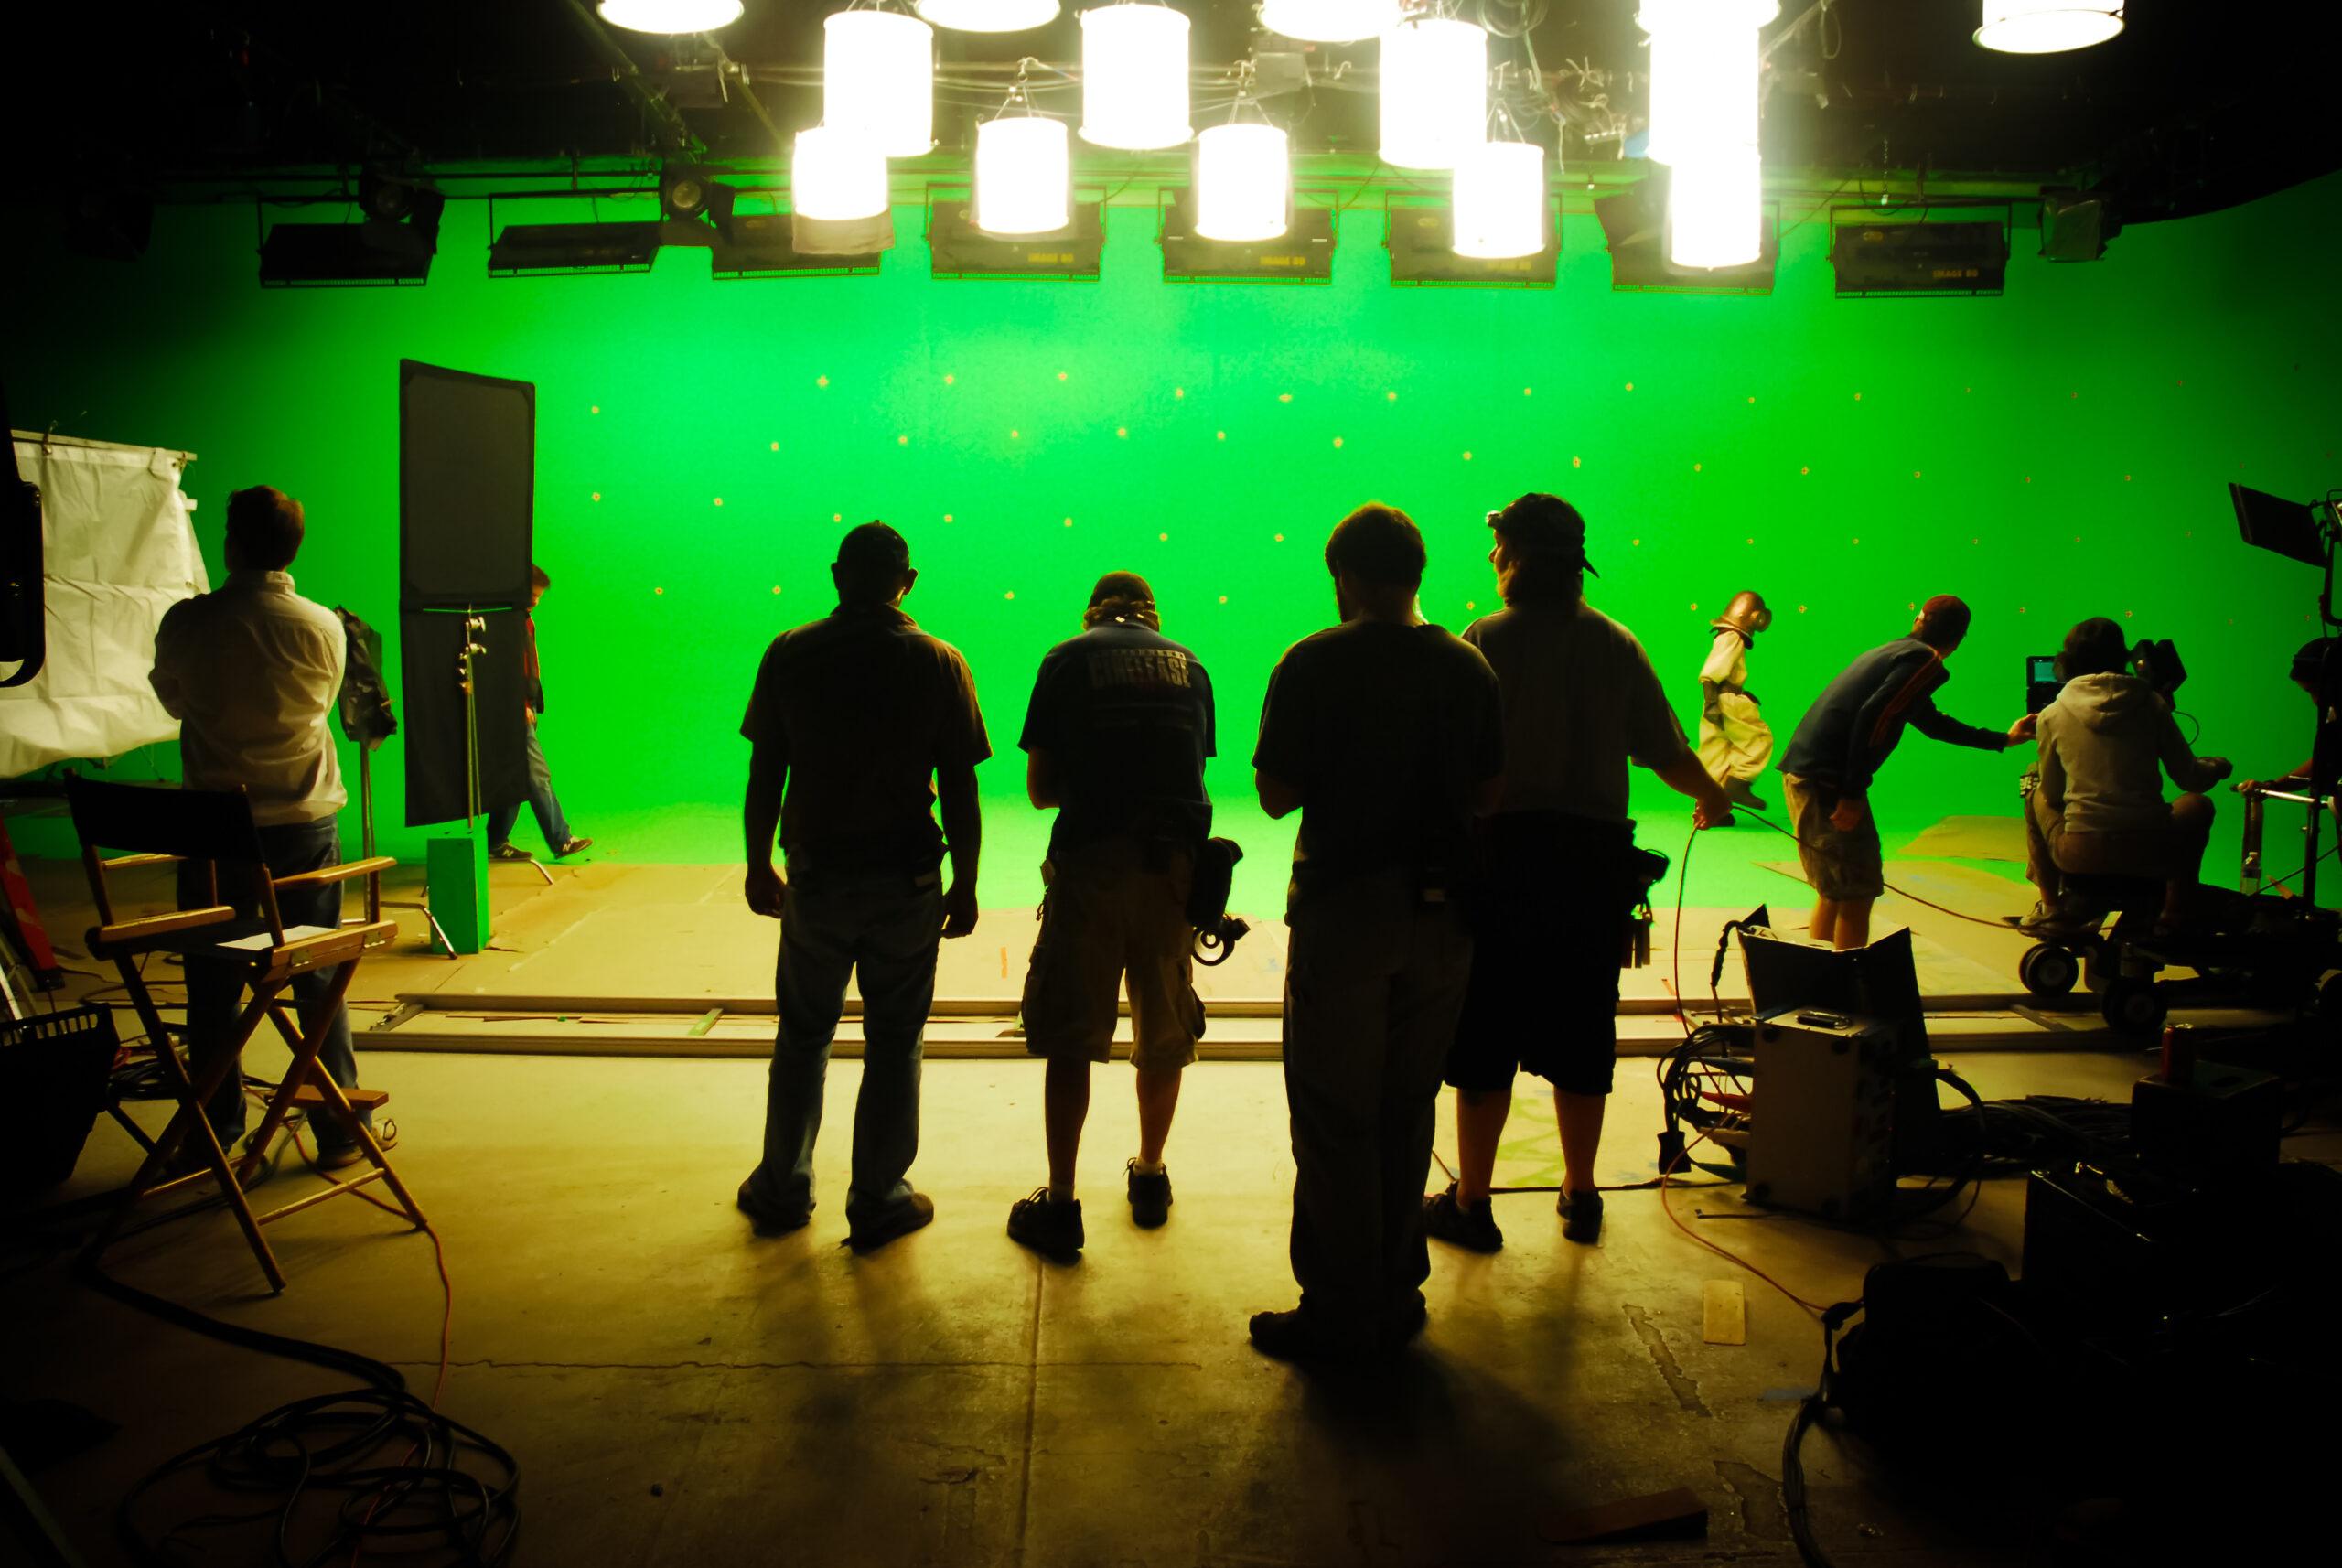 A group of filmmakers at work on a film set, showcasing the equipment and expertise of a professional film production company.